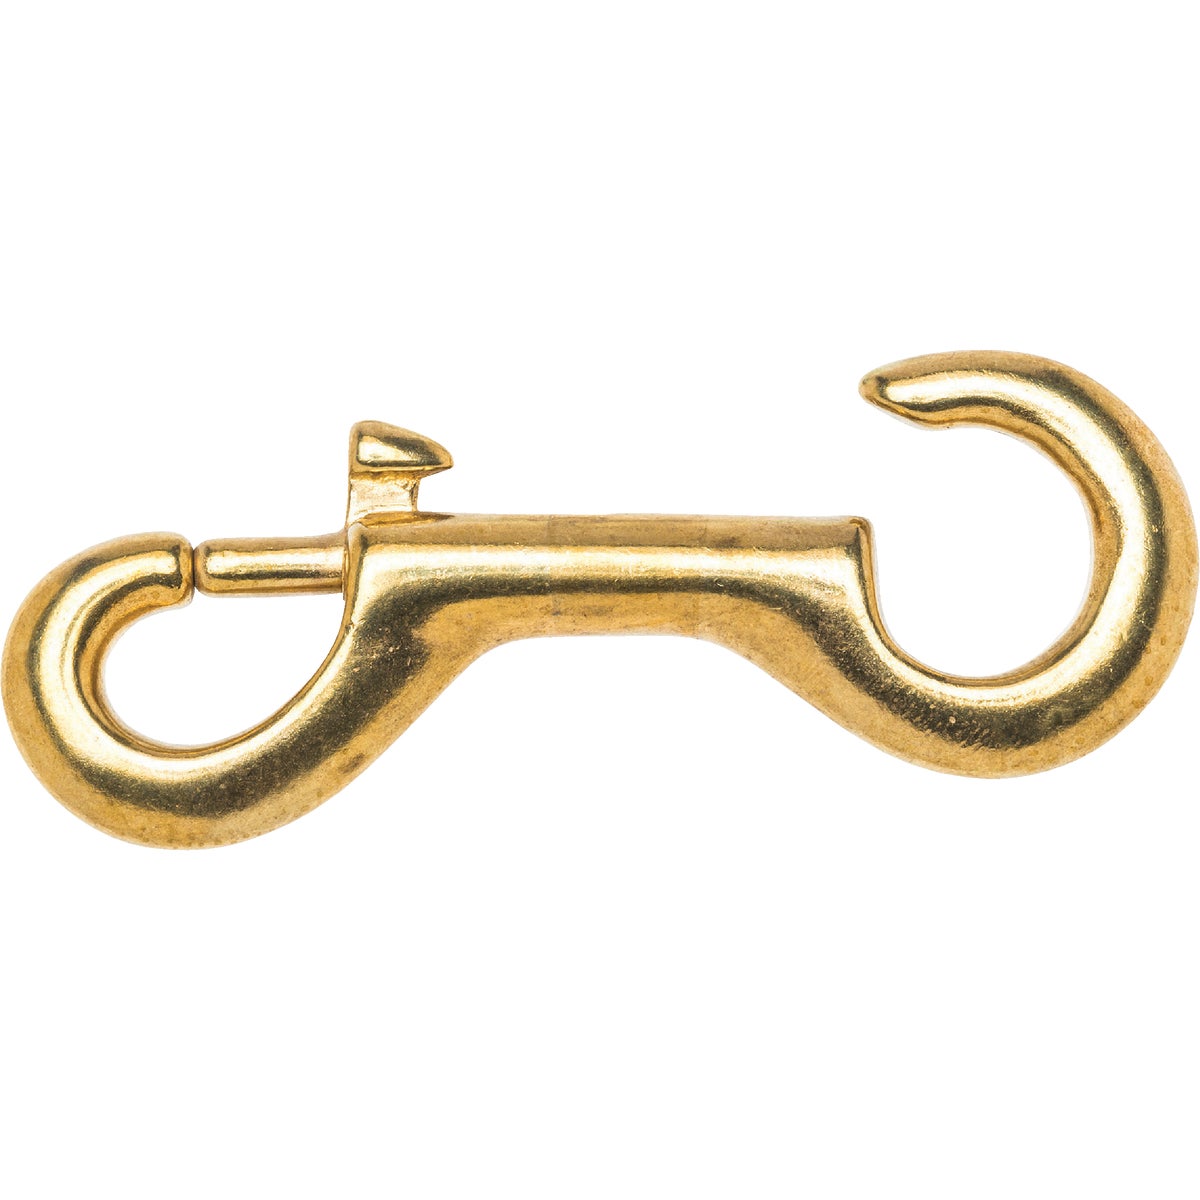 Item 746189, Polished solid bronze construction open eye chain snap. Eye size: 3/8 In.